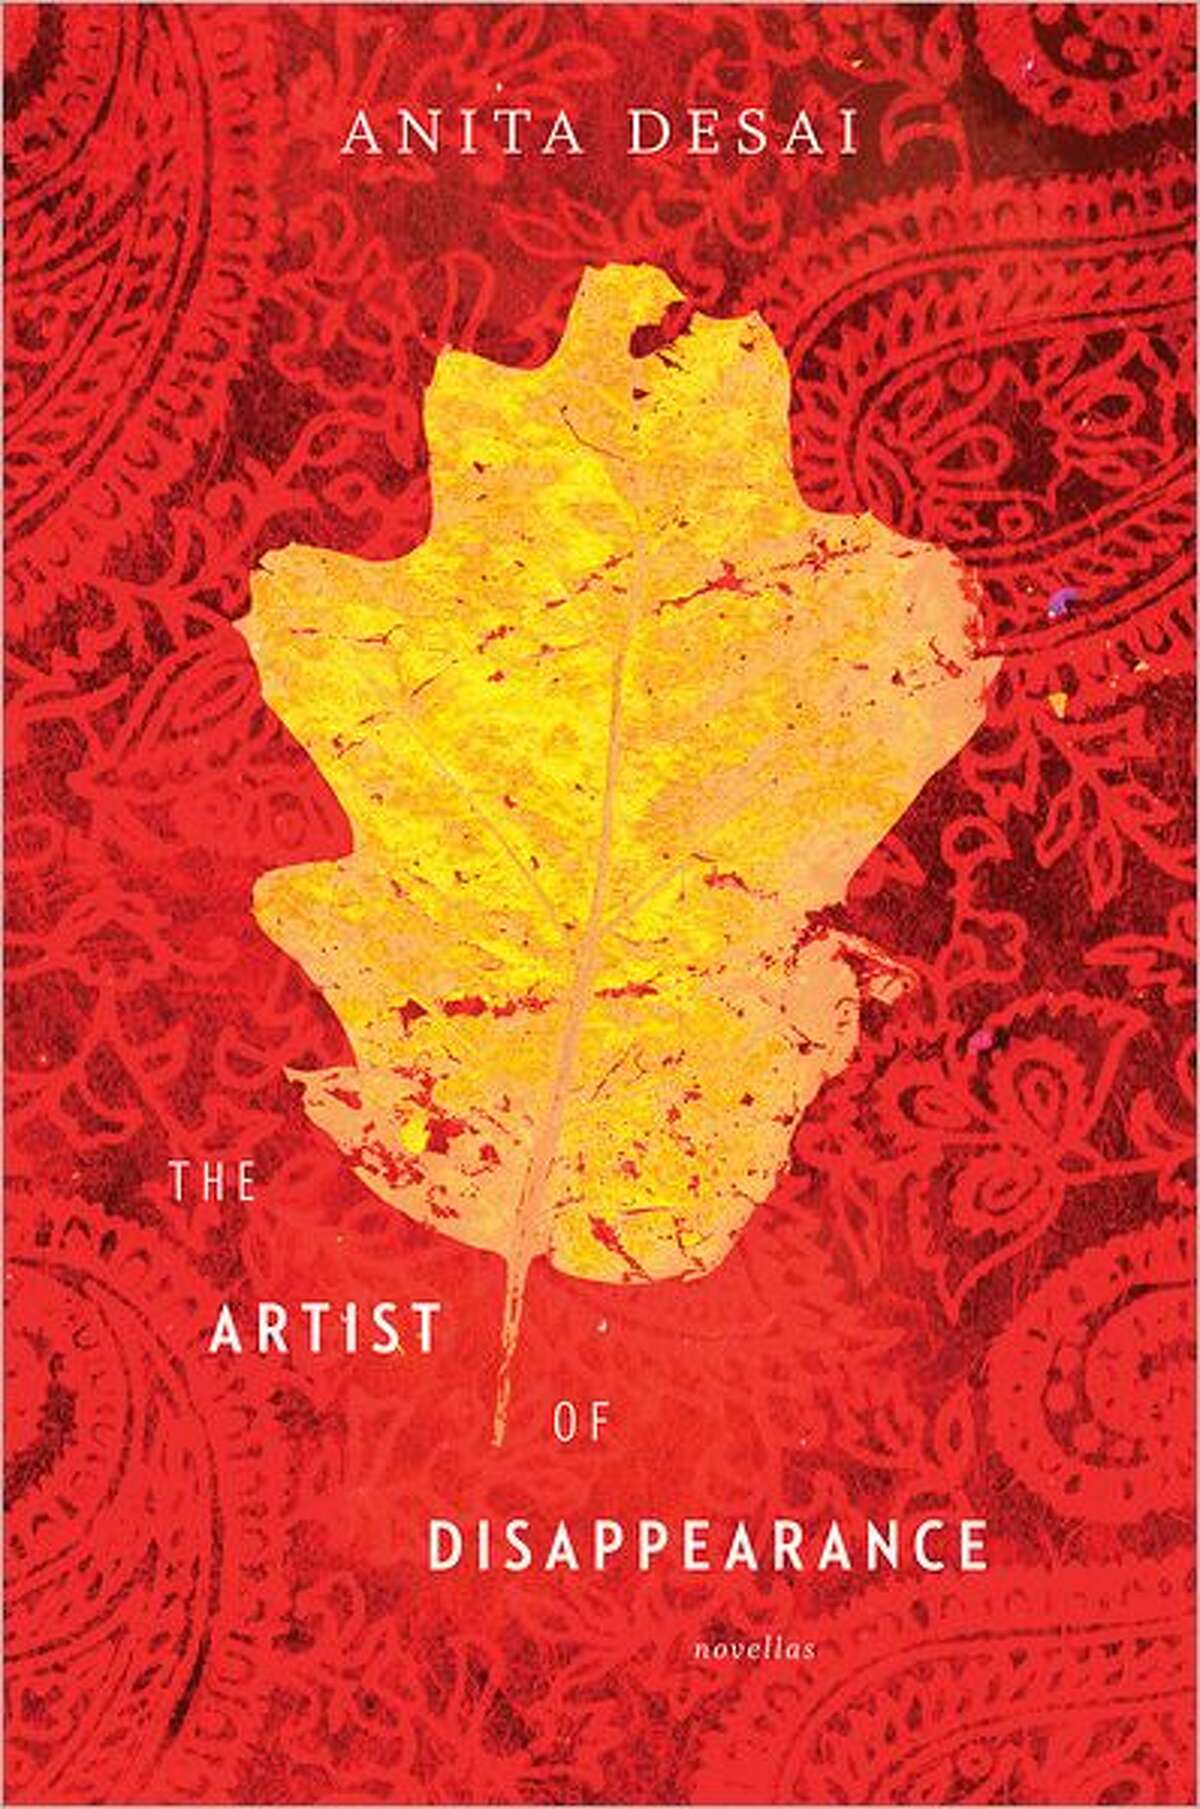 "The Artist of Disappearance" by Anita Desai